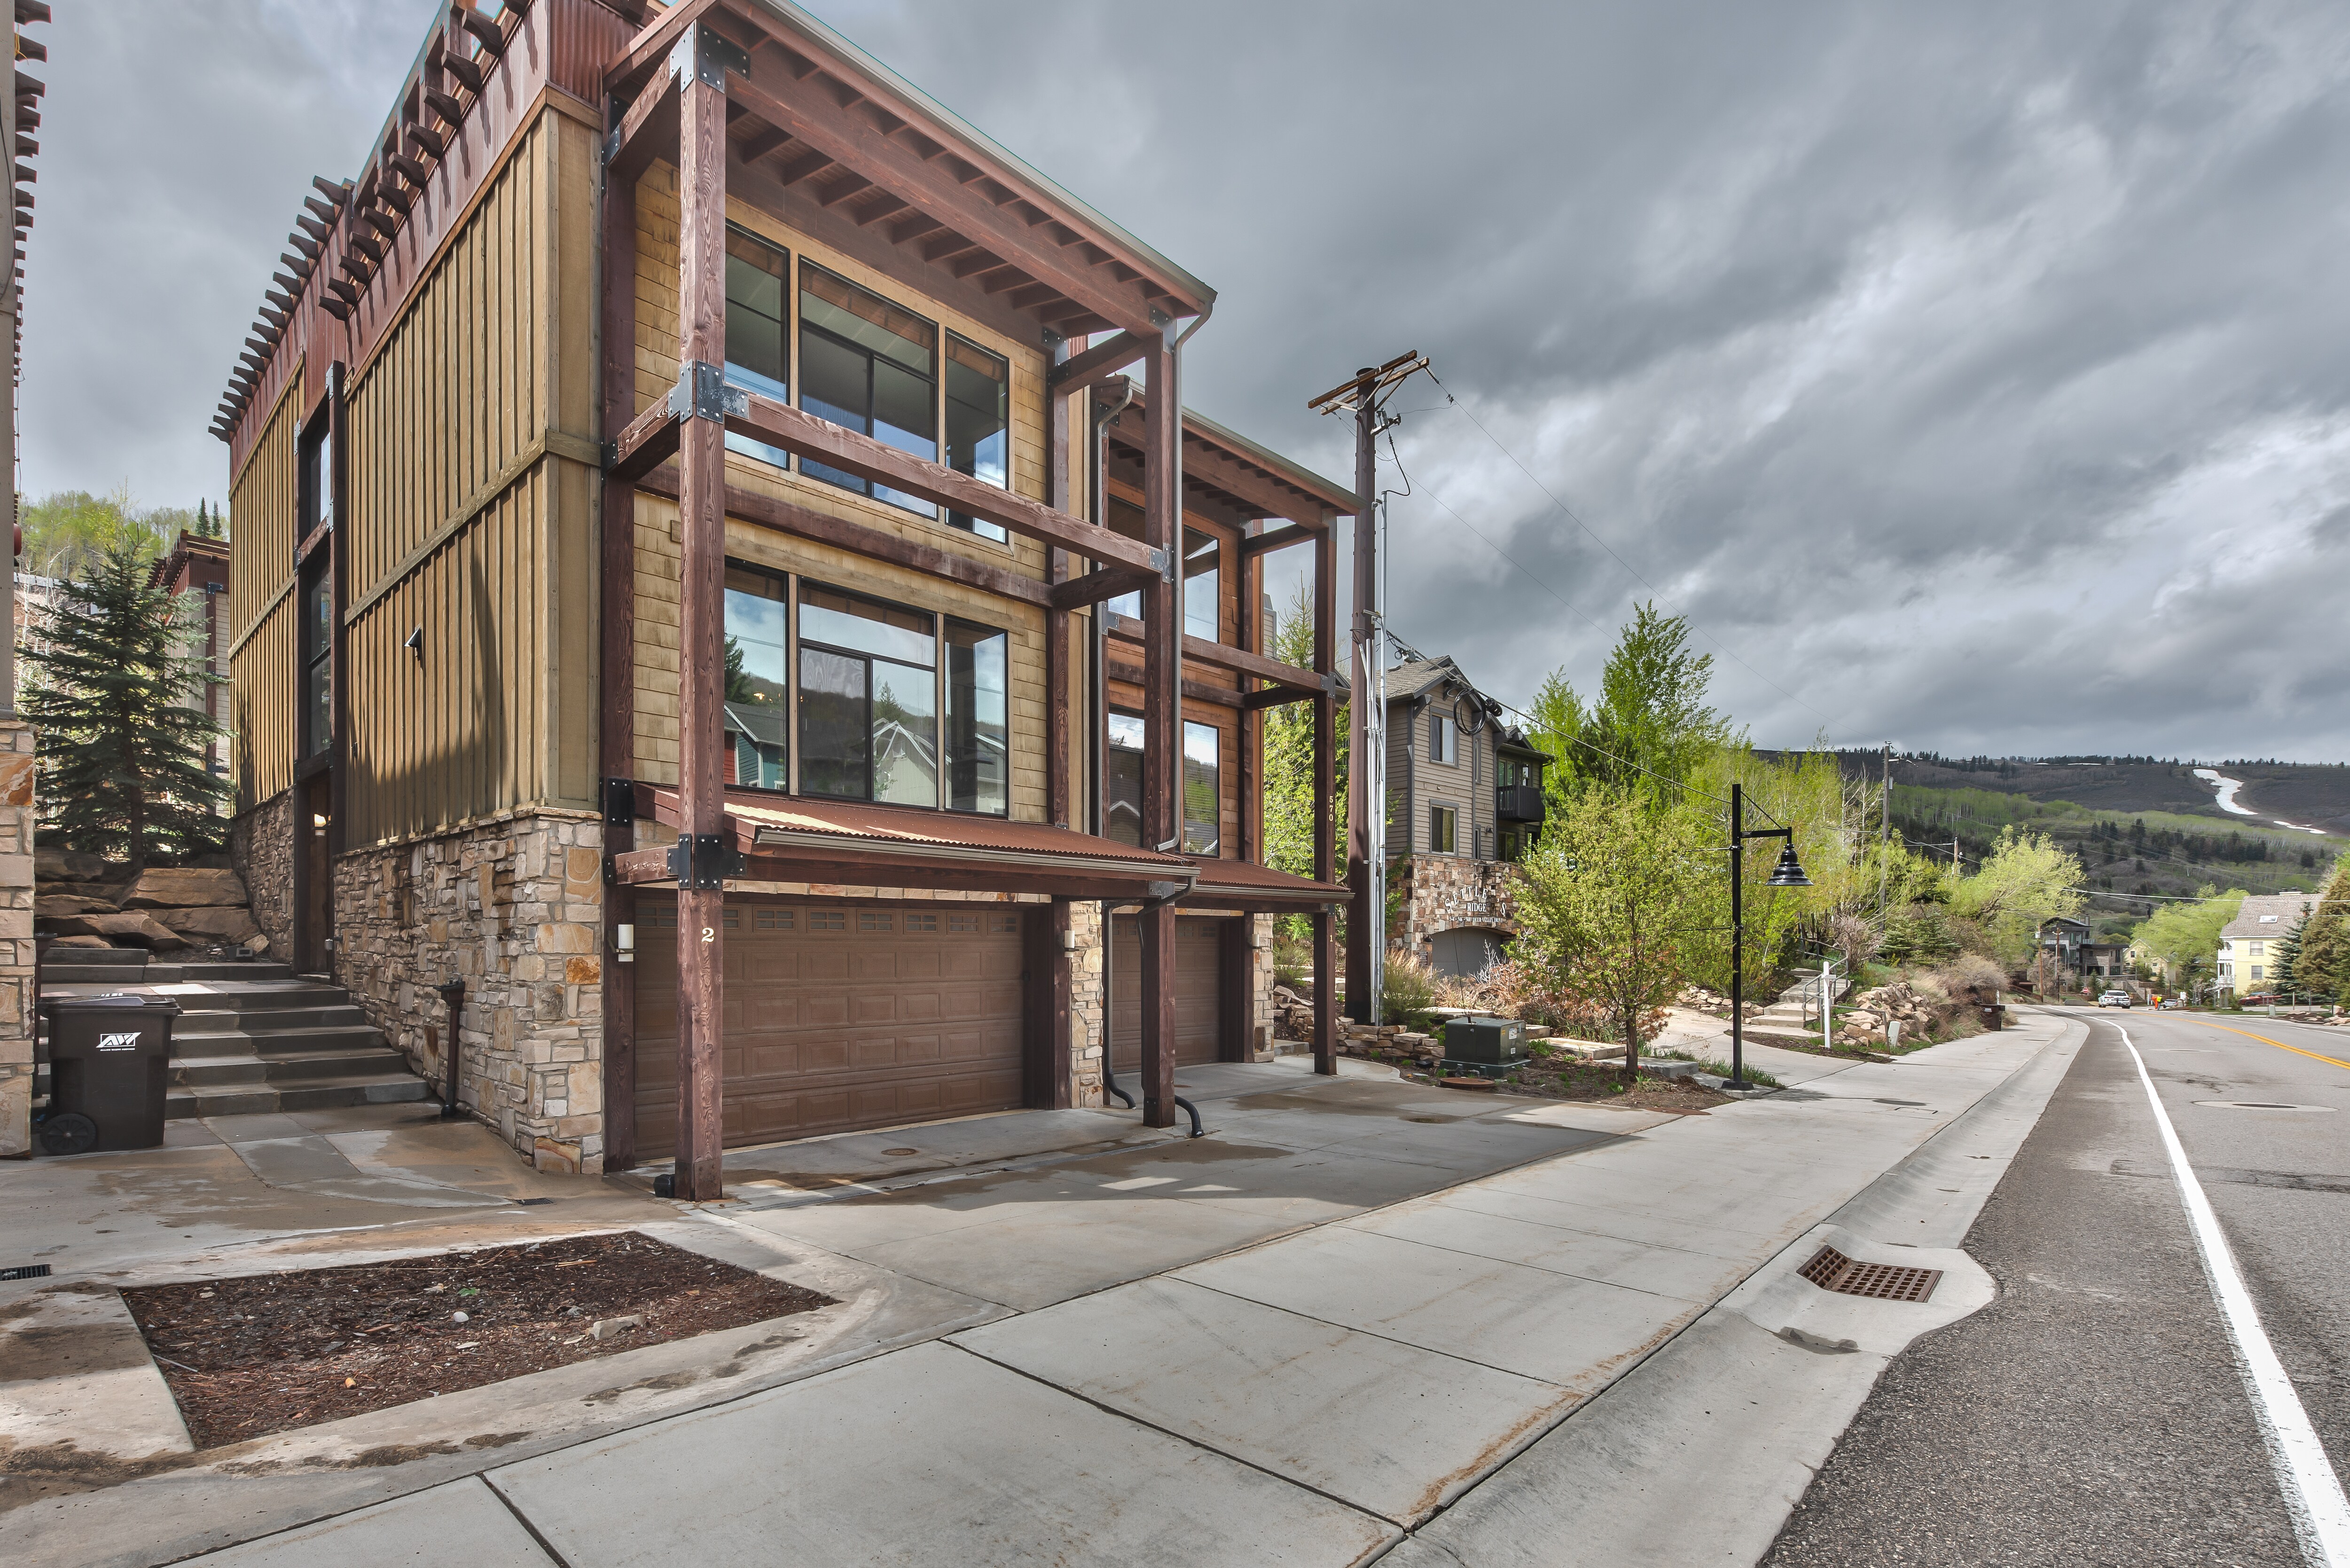 Park City Ultimate Loft - 3,300 Sq Ft Home with 3 Master Suites, Roof-Top Terrace with Hot Tub - On Free Bus Route